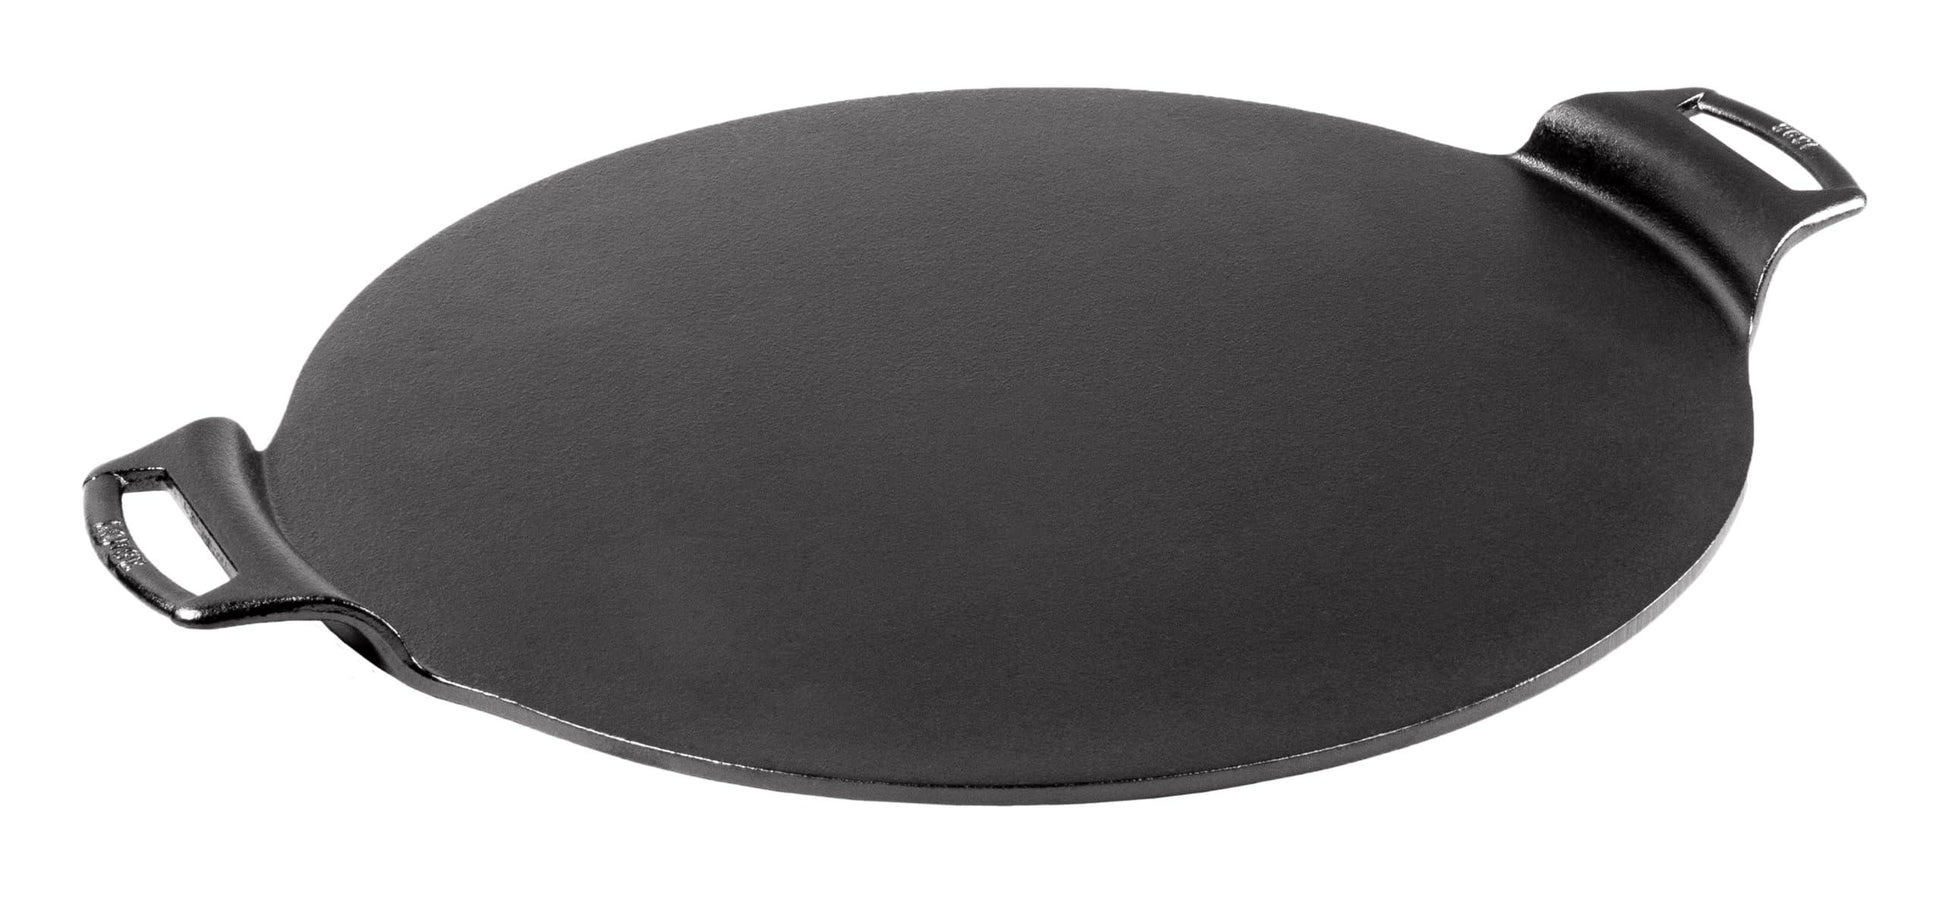 Lodge Cast Iron Pizza Pan, 15 inch - CookCave